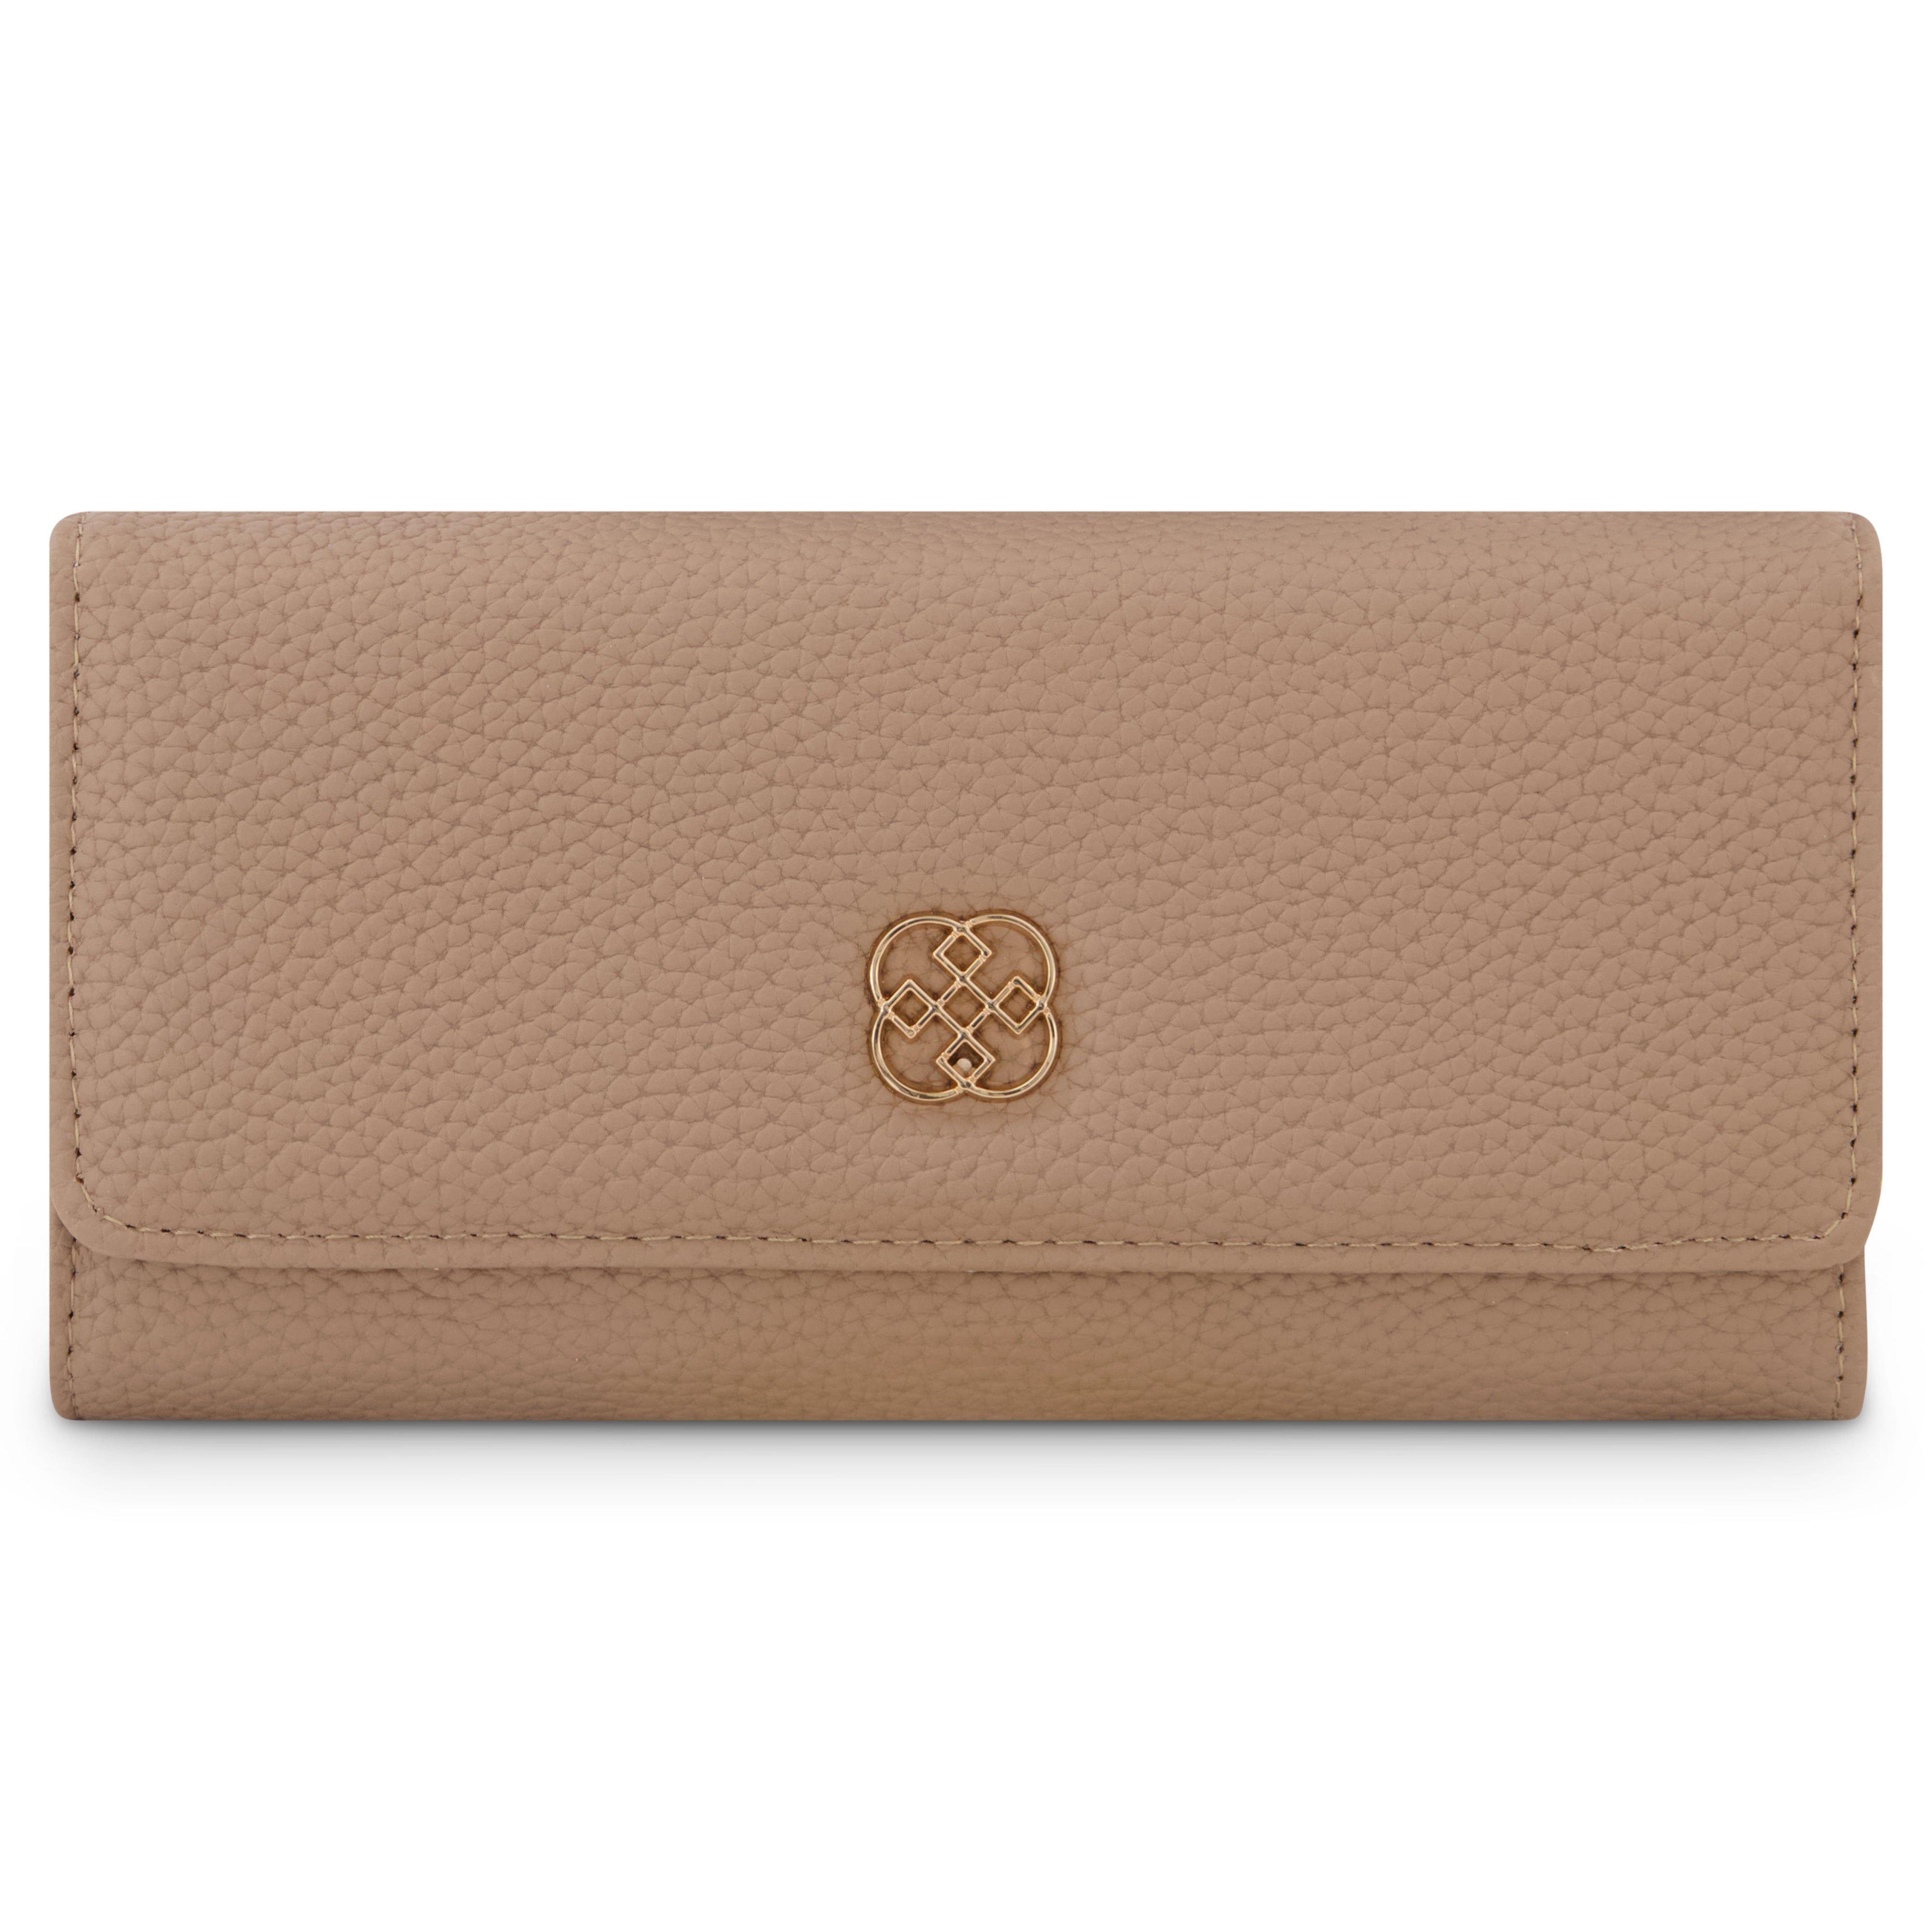 Daisy Fuentes Women's Long Flap Trifold Wallet in Pebble Texture for Women, Taupe | Walmart (US)